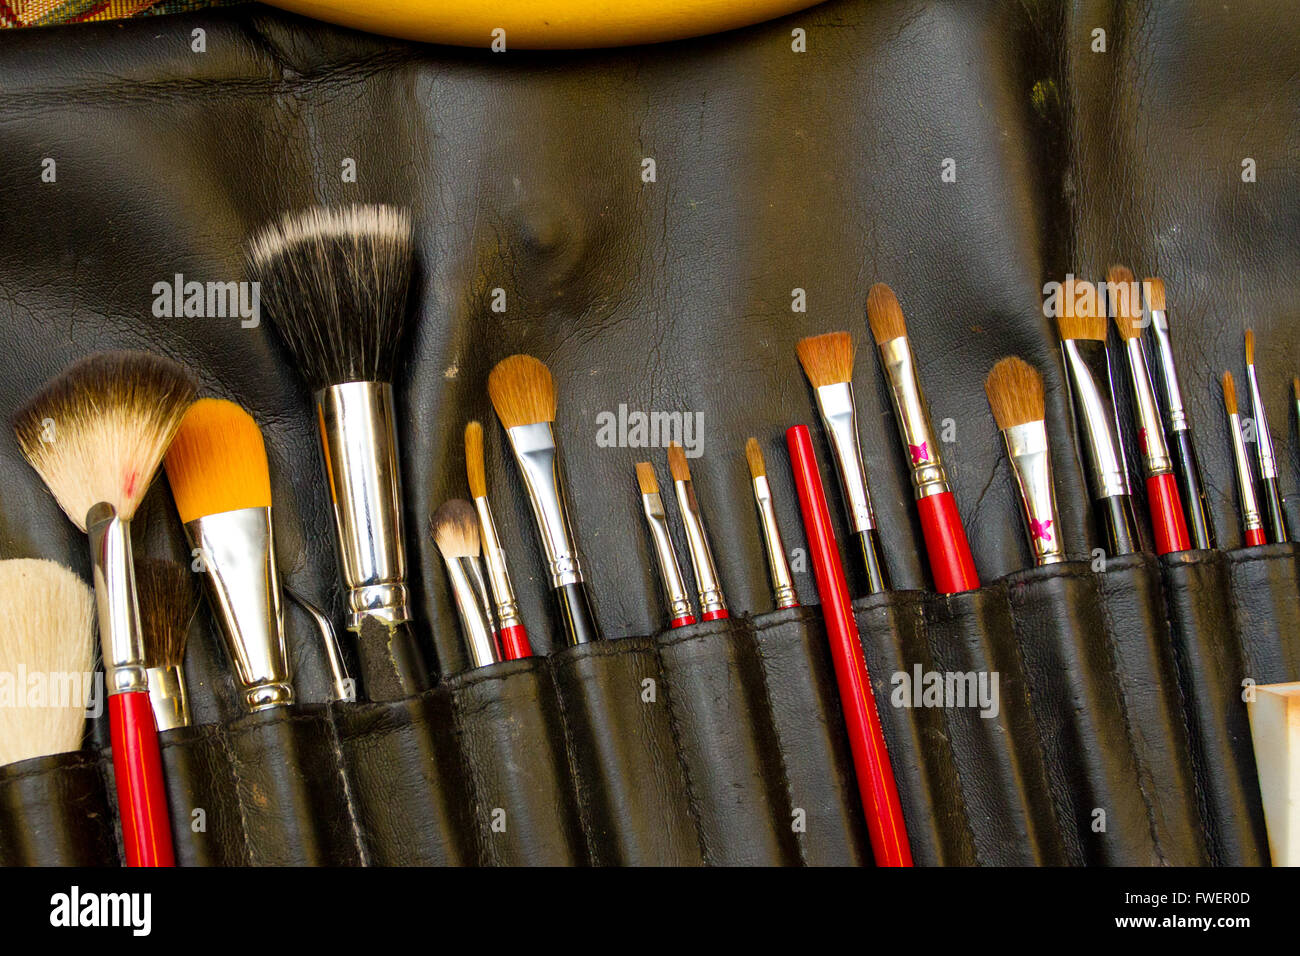 Makeup brushes in a container for wedding makeup and styling. Stock Photo